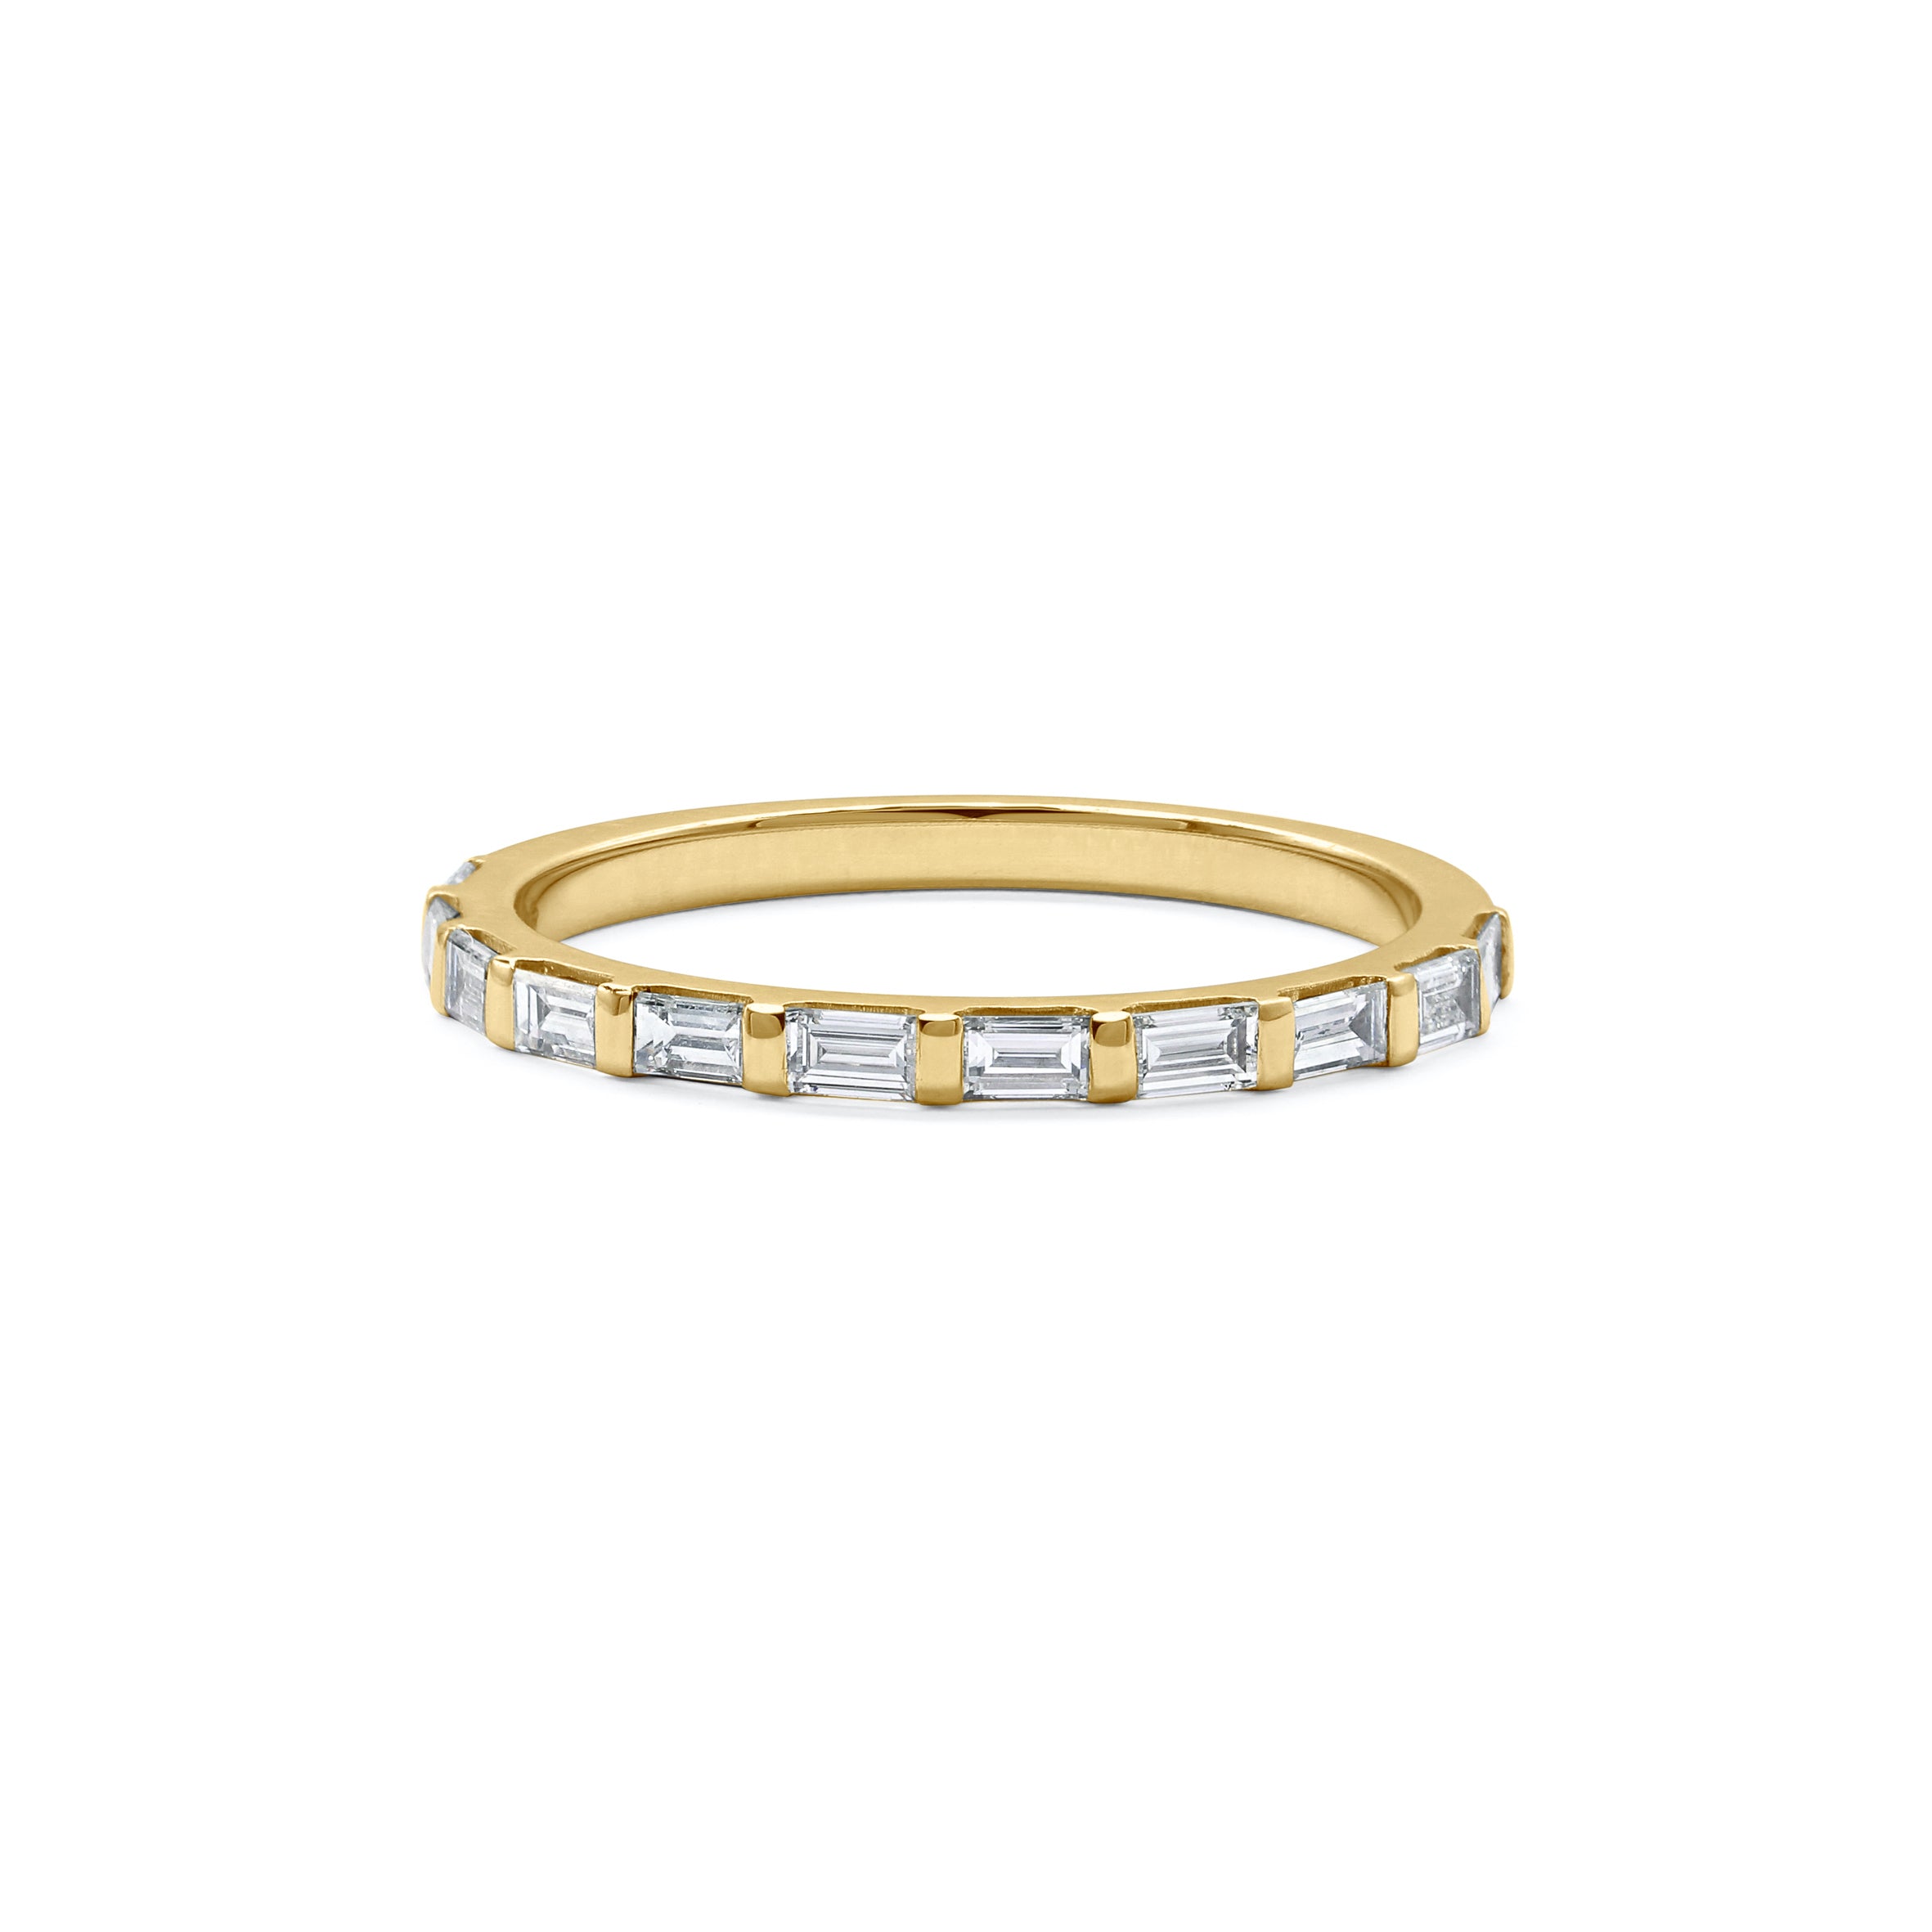 The Bar Baguette Diamond Wedding Band by East London jeweller Rachel Boston | Discover our collections of unique and timeless engagement rings, wedding rings, and modern fine jewellery.